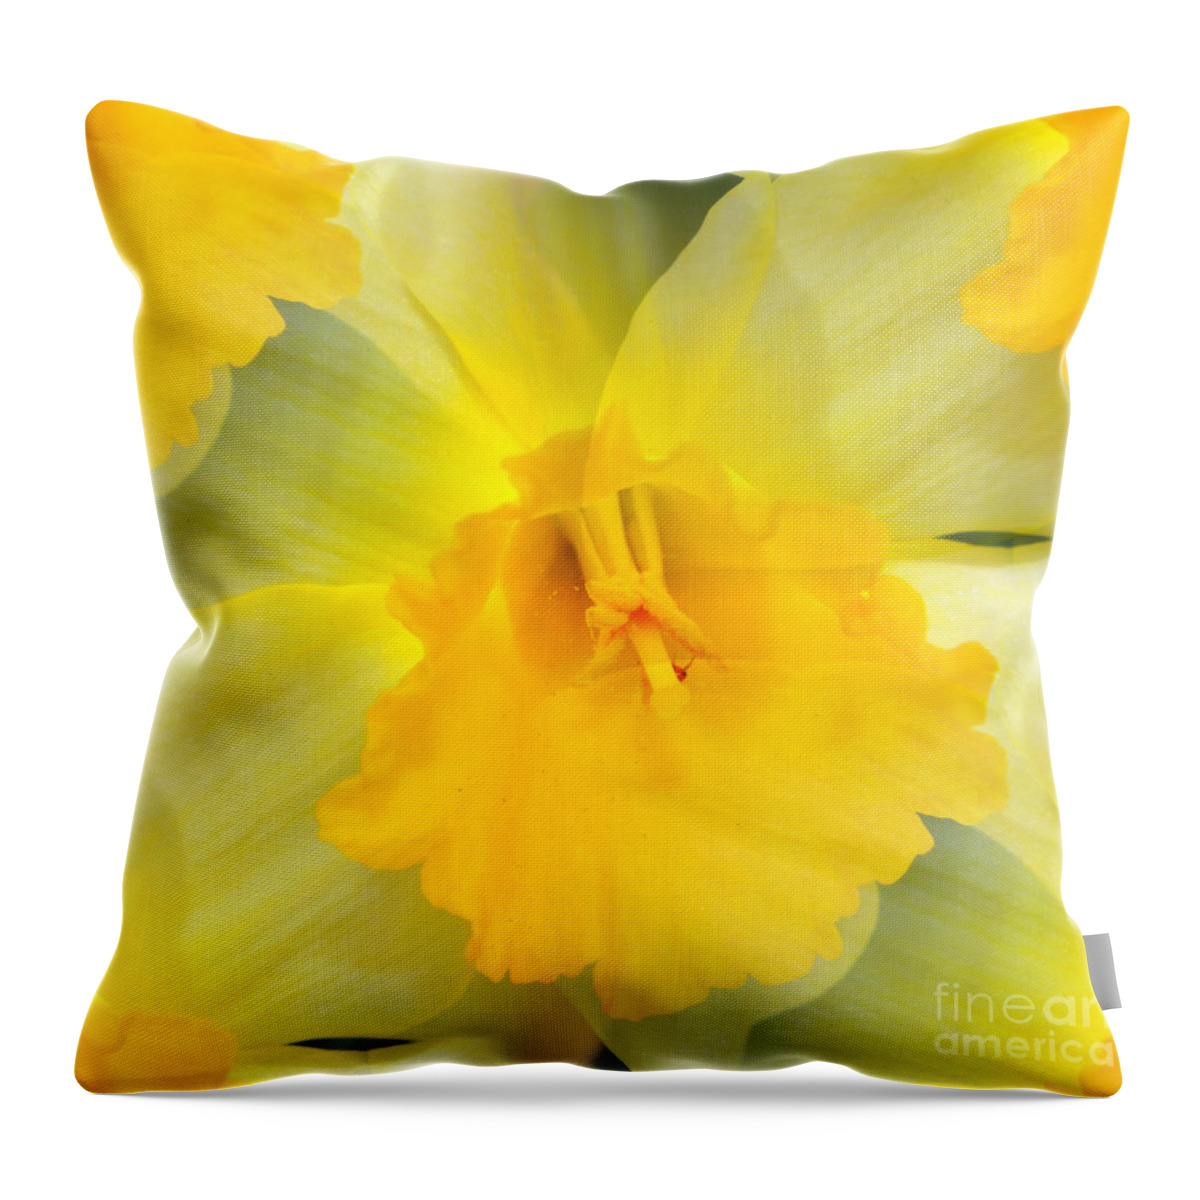 Daffodil Throw Pillow featuring the photograph Endless Yellow Daffodil by Judy Palkimas